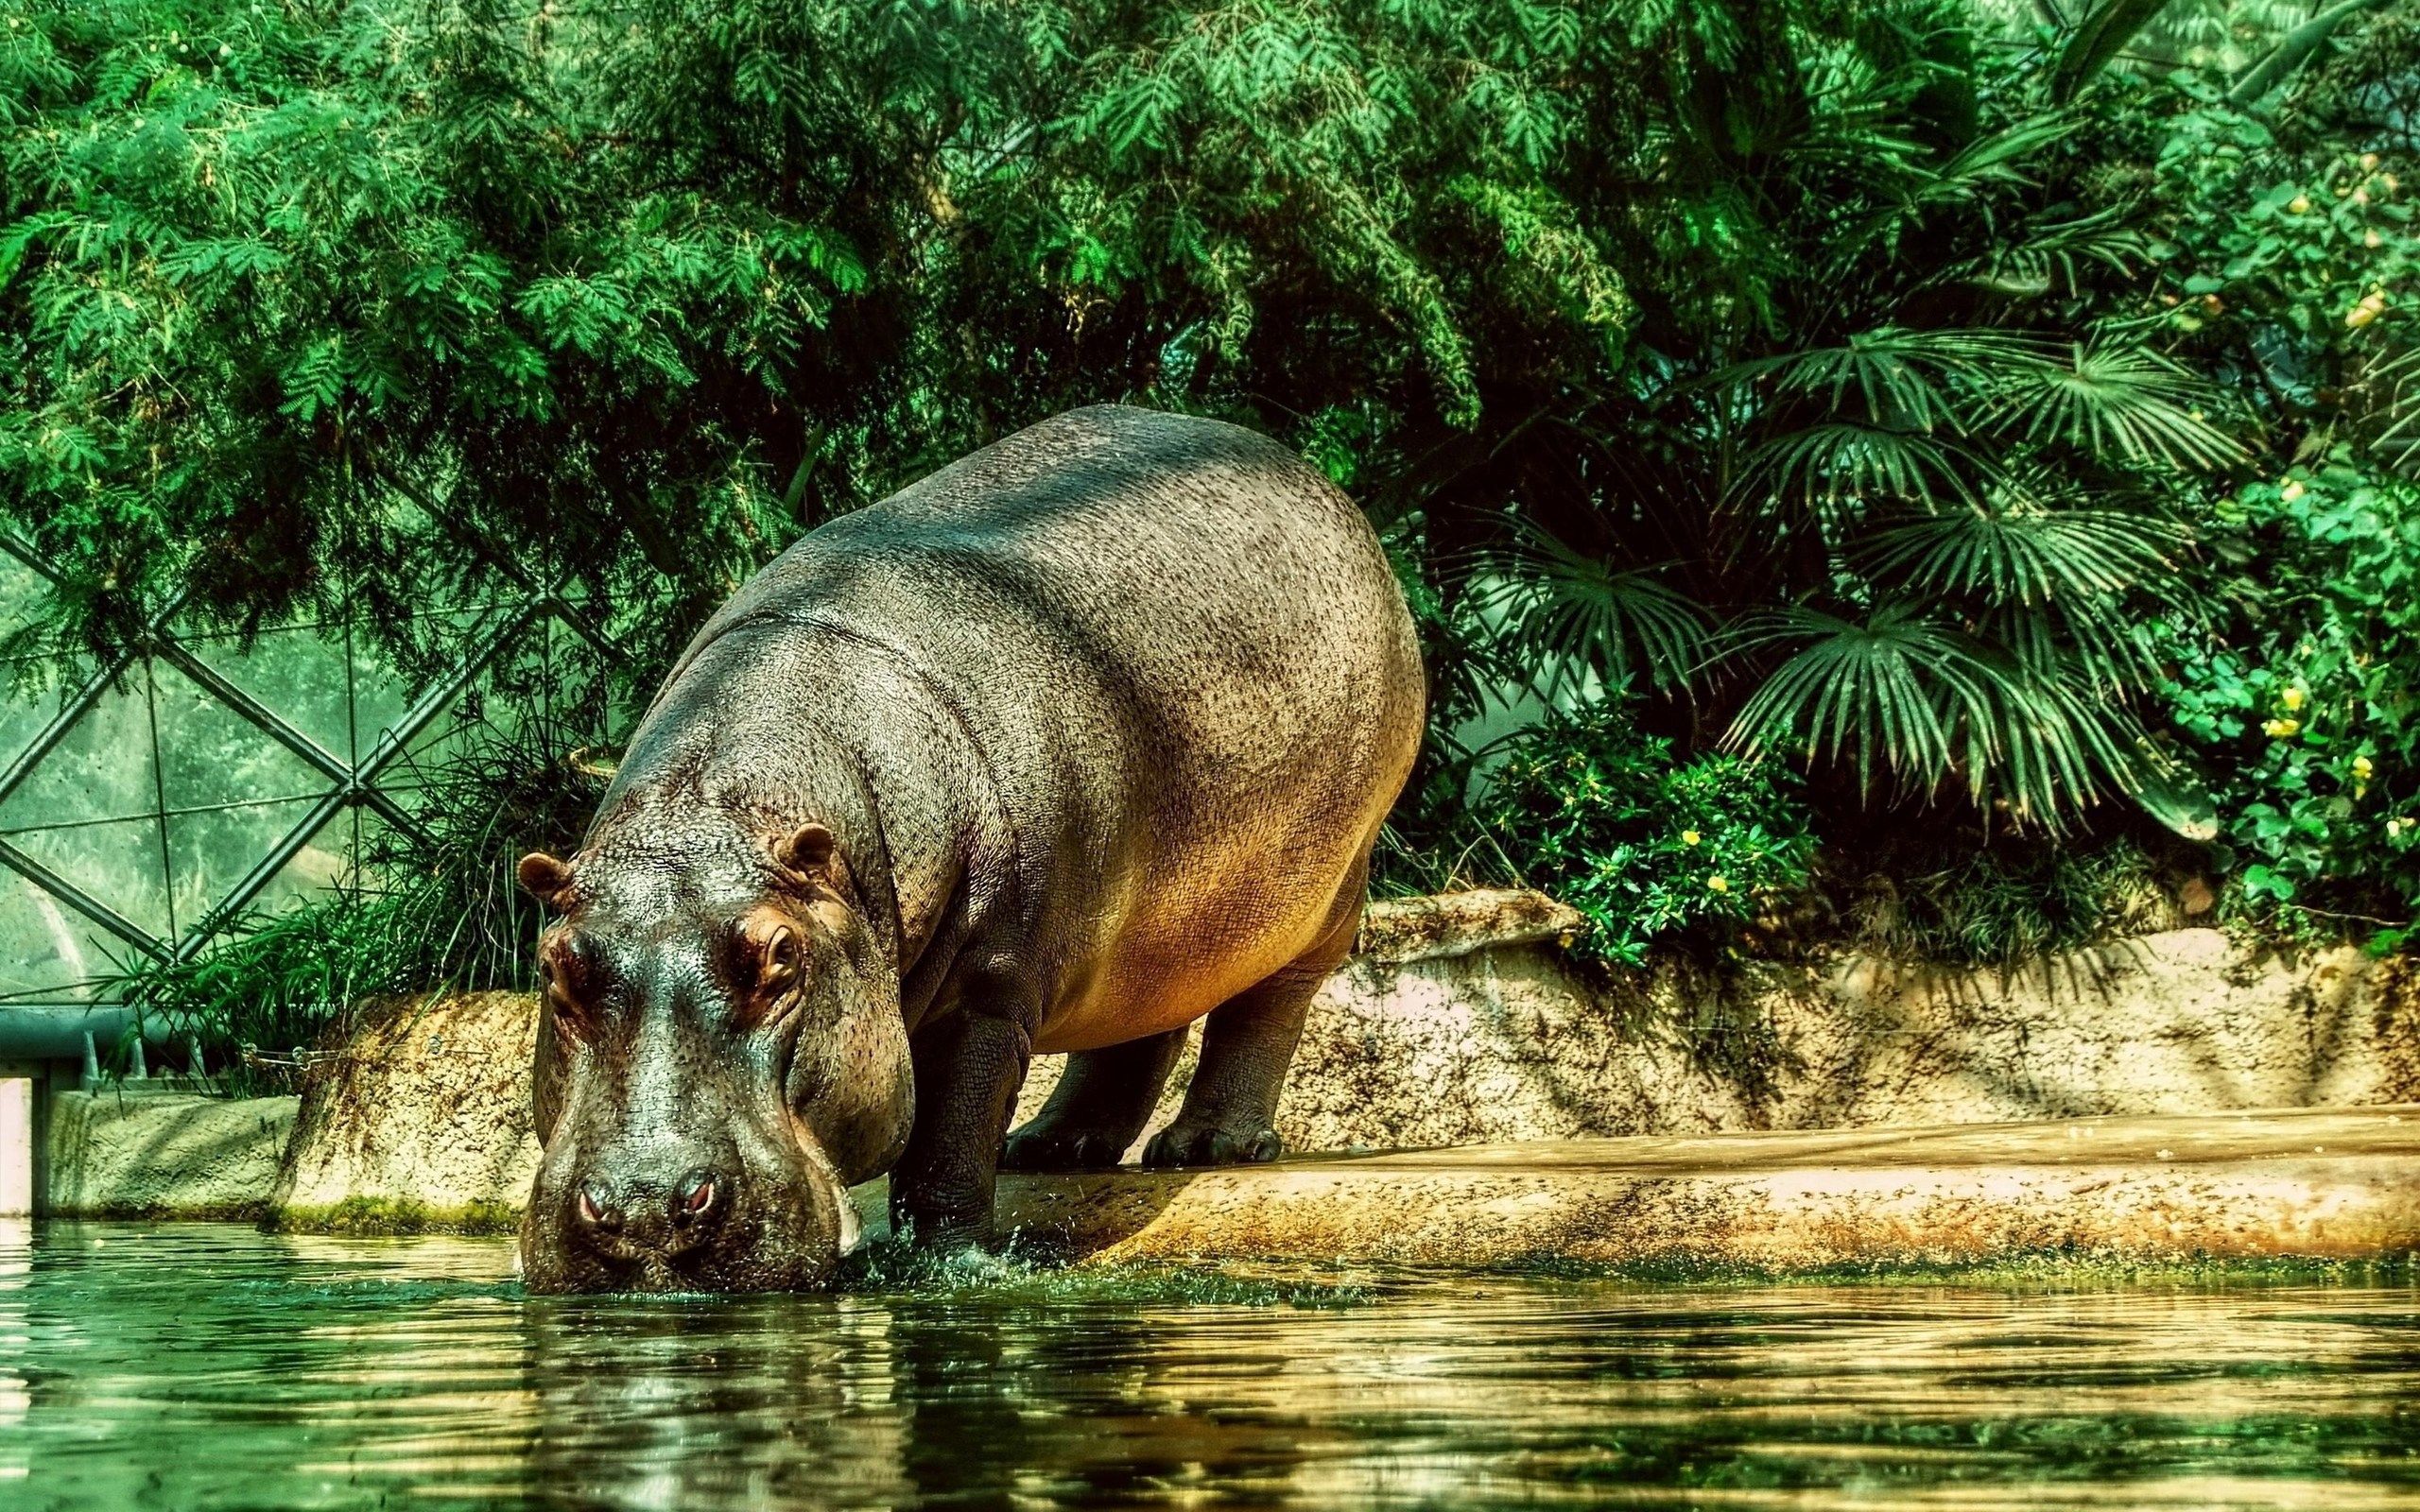 Hippo Wallpaper, Awesome 37 Hippo Wallpaper. High Quality